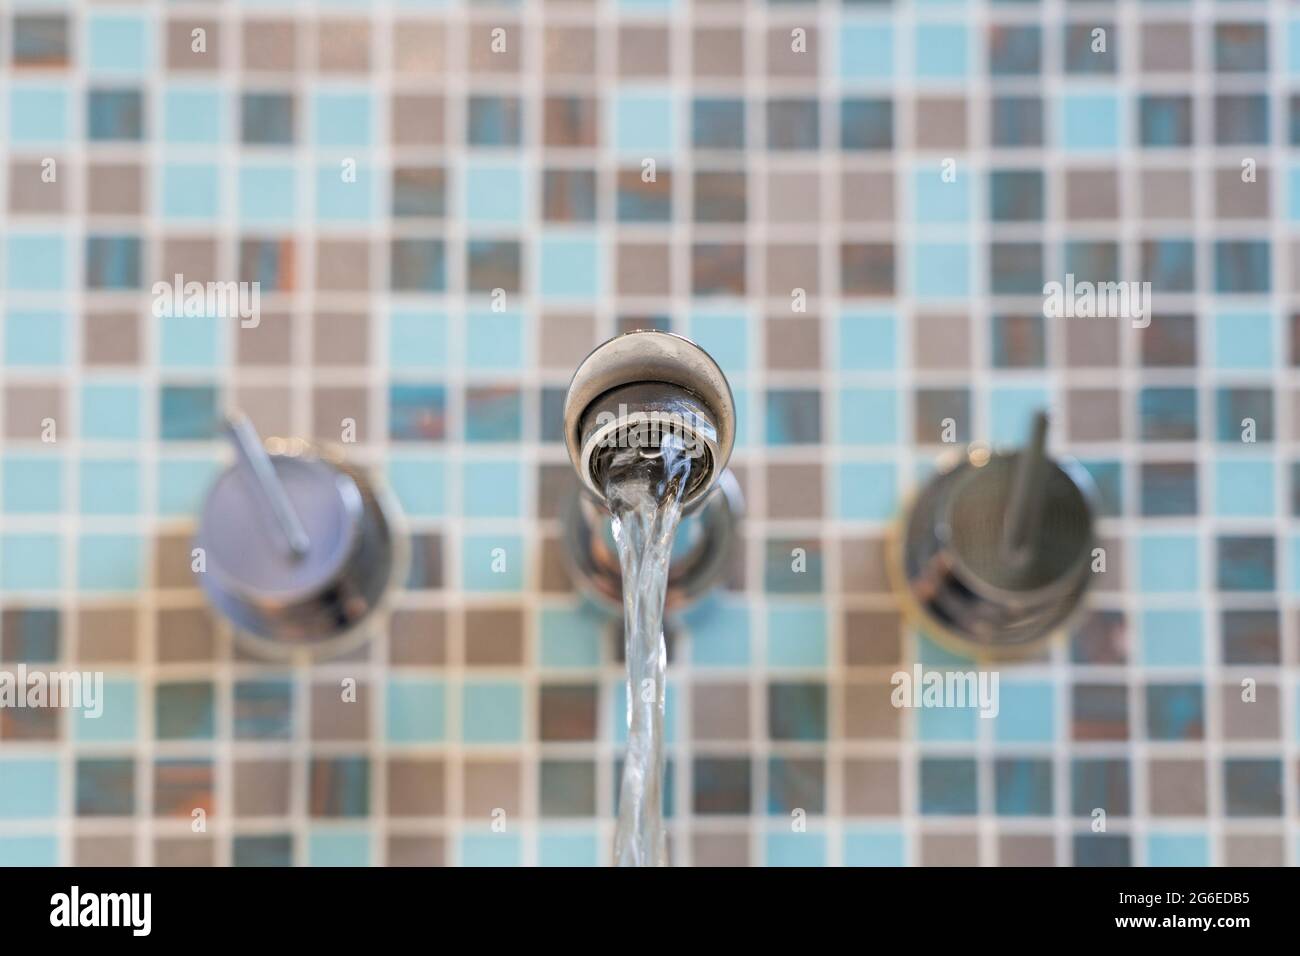 Closeup on a bath tap with water flowing, UK. Concept: water conservation, wasting water, save water, home water efficient, water usage, consumption Stock Photo